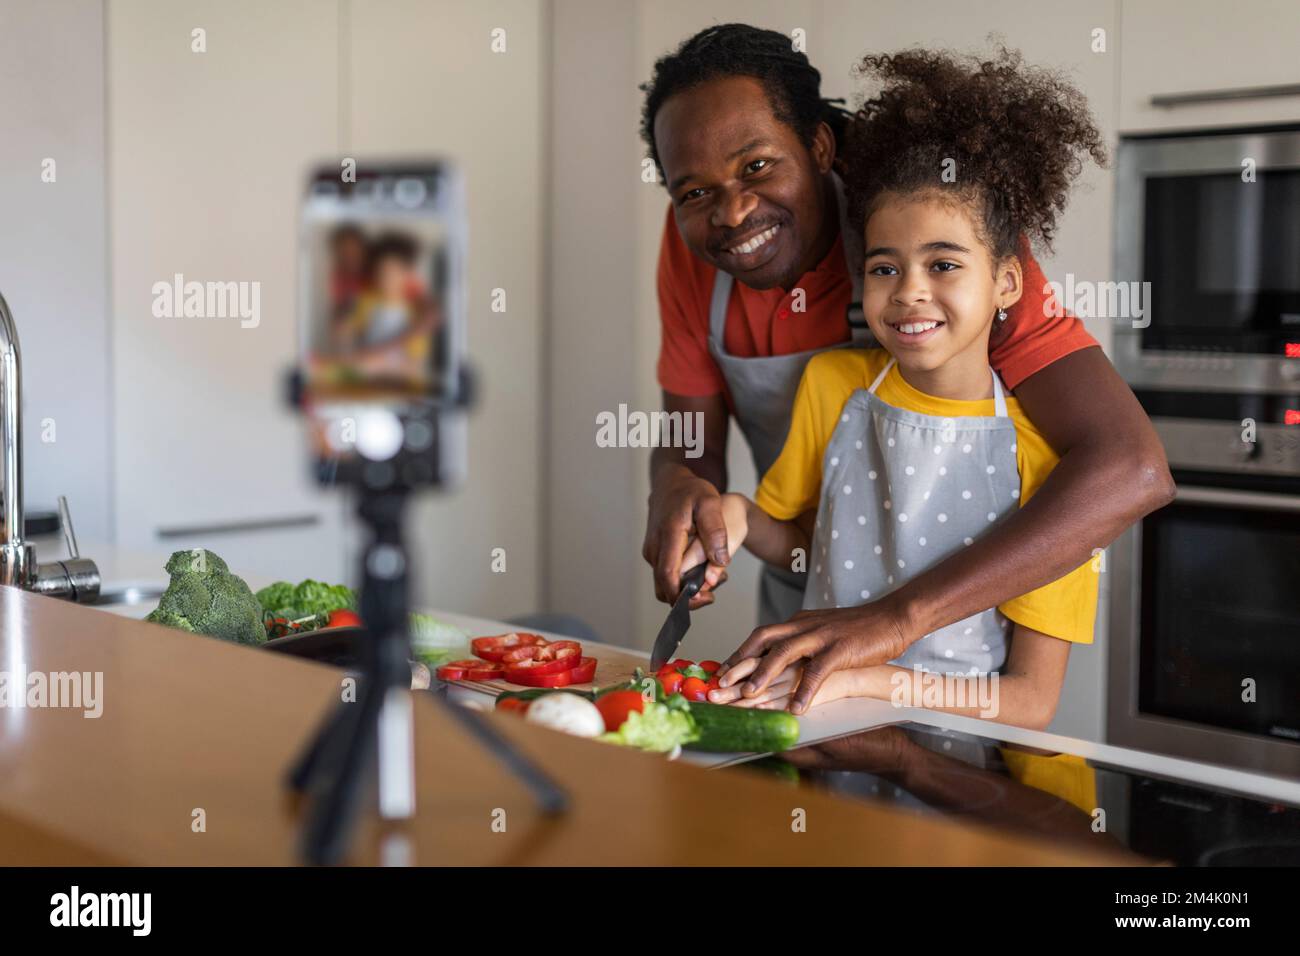 Food Blog. Black Father And Daughter Cooking At Camera In Kitchen Stock Photo